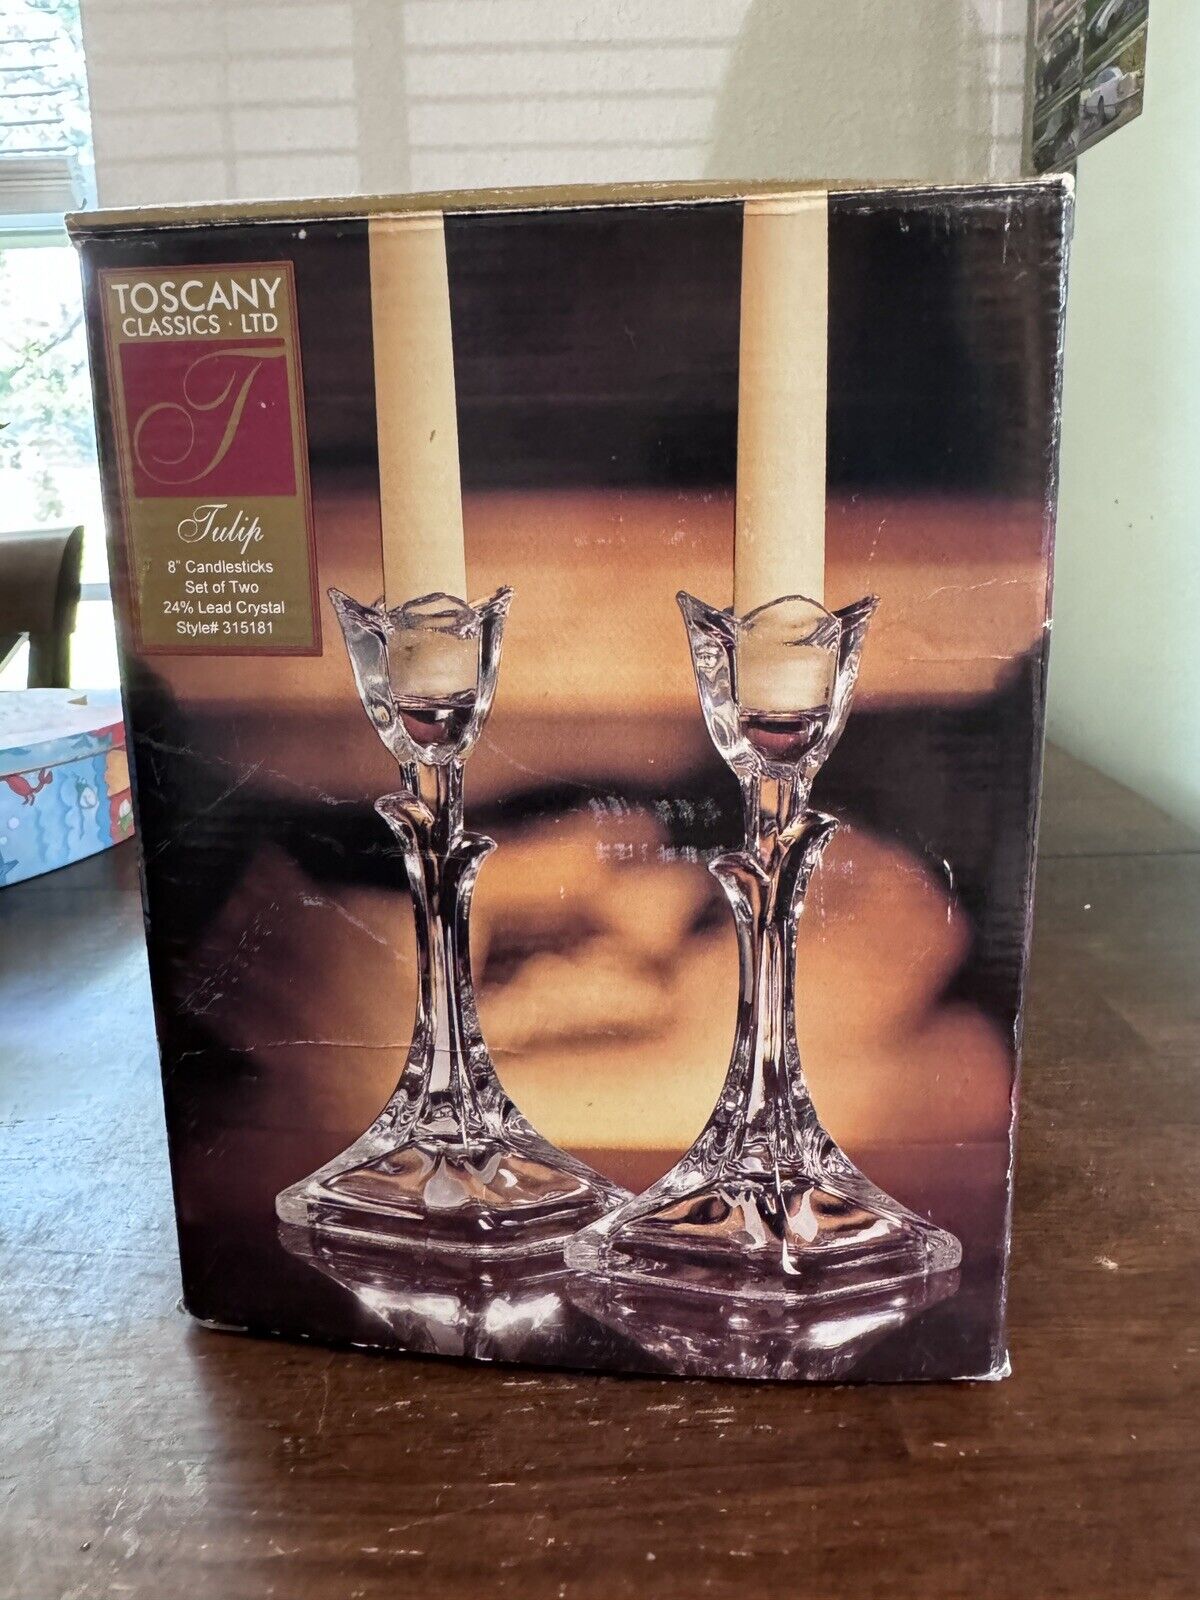 Vintage Toscany Classics LTD Tulips 8” Candle Sticks Set Of Two 24% Chrystal